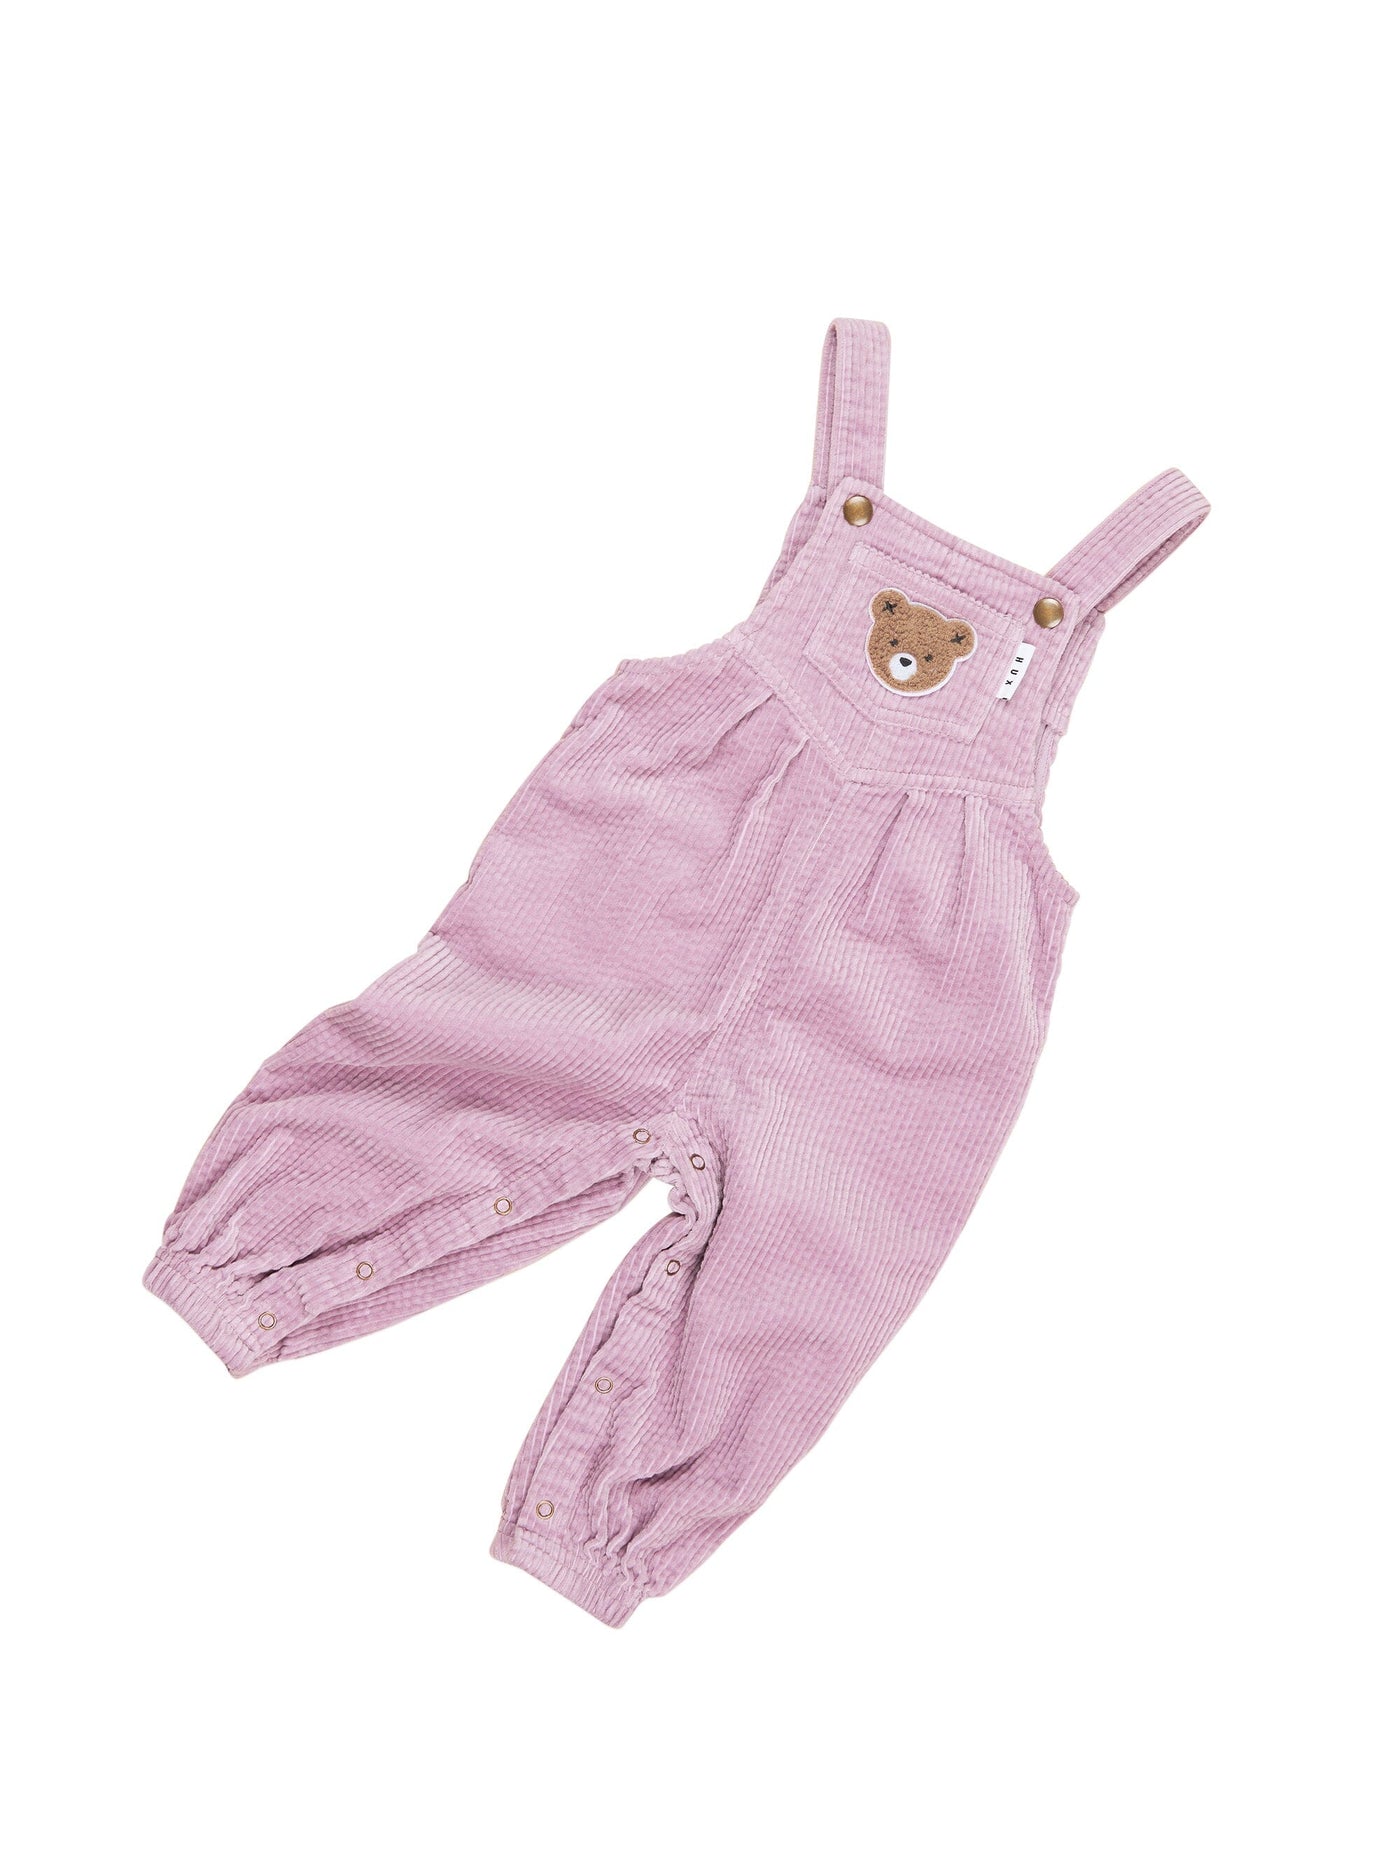 Huxbaby Orchid Cord Overalls HB0055W24 Overalls Huxbaby 